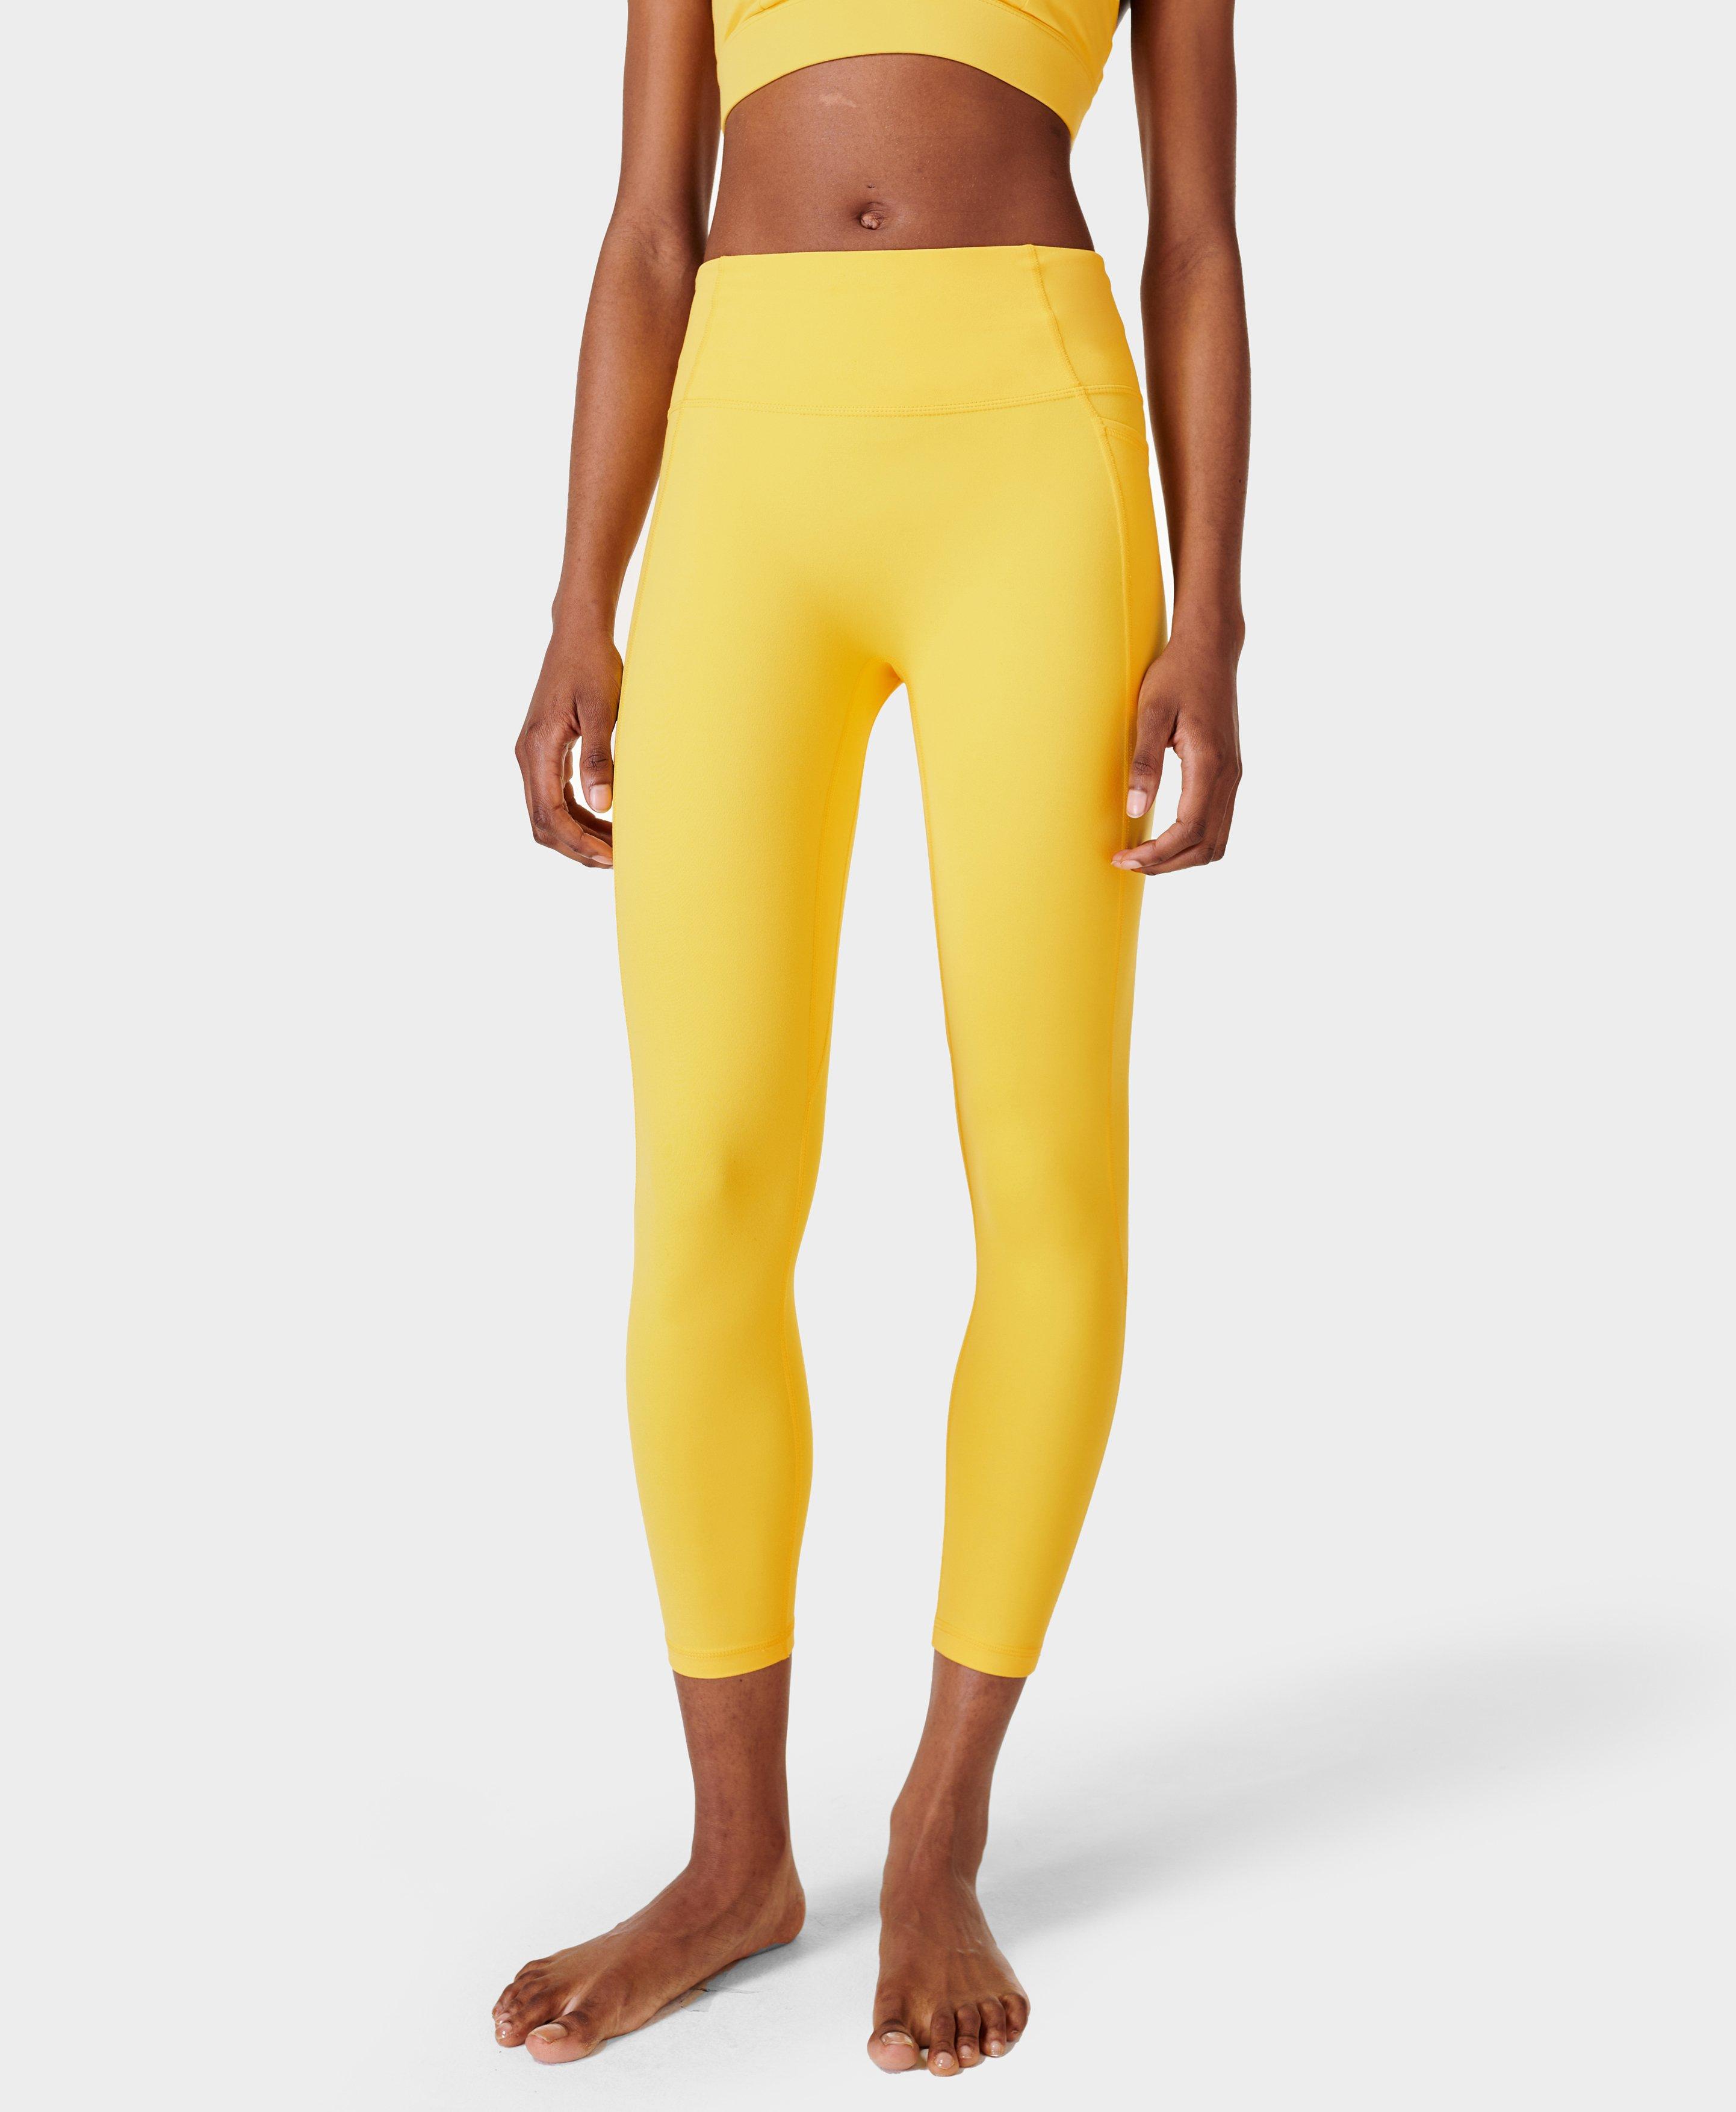 Buttery Smooth Summer Yellow Tie Dye High Waisted Leggings - Plus Size